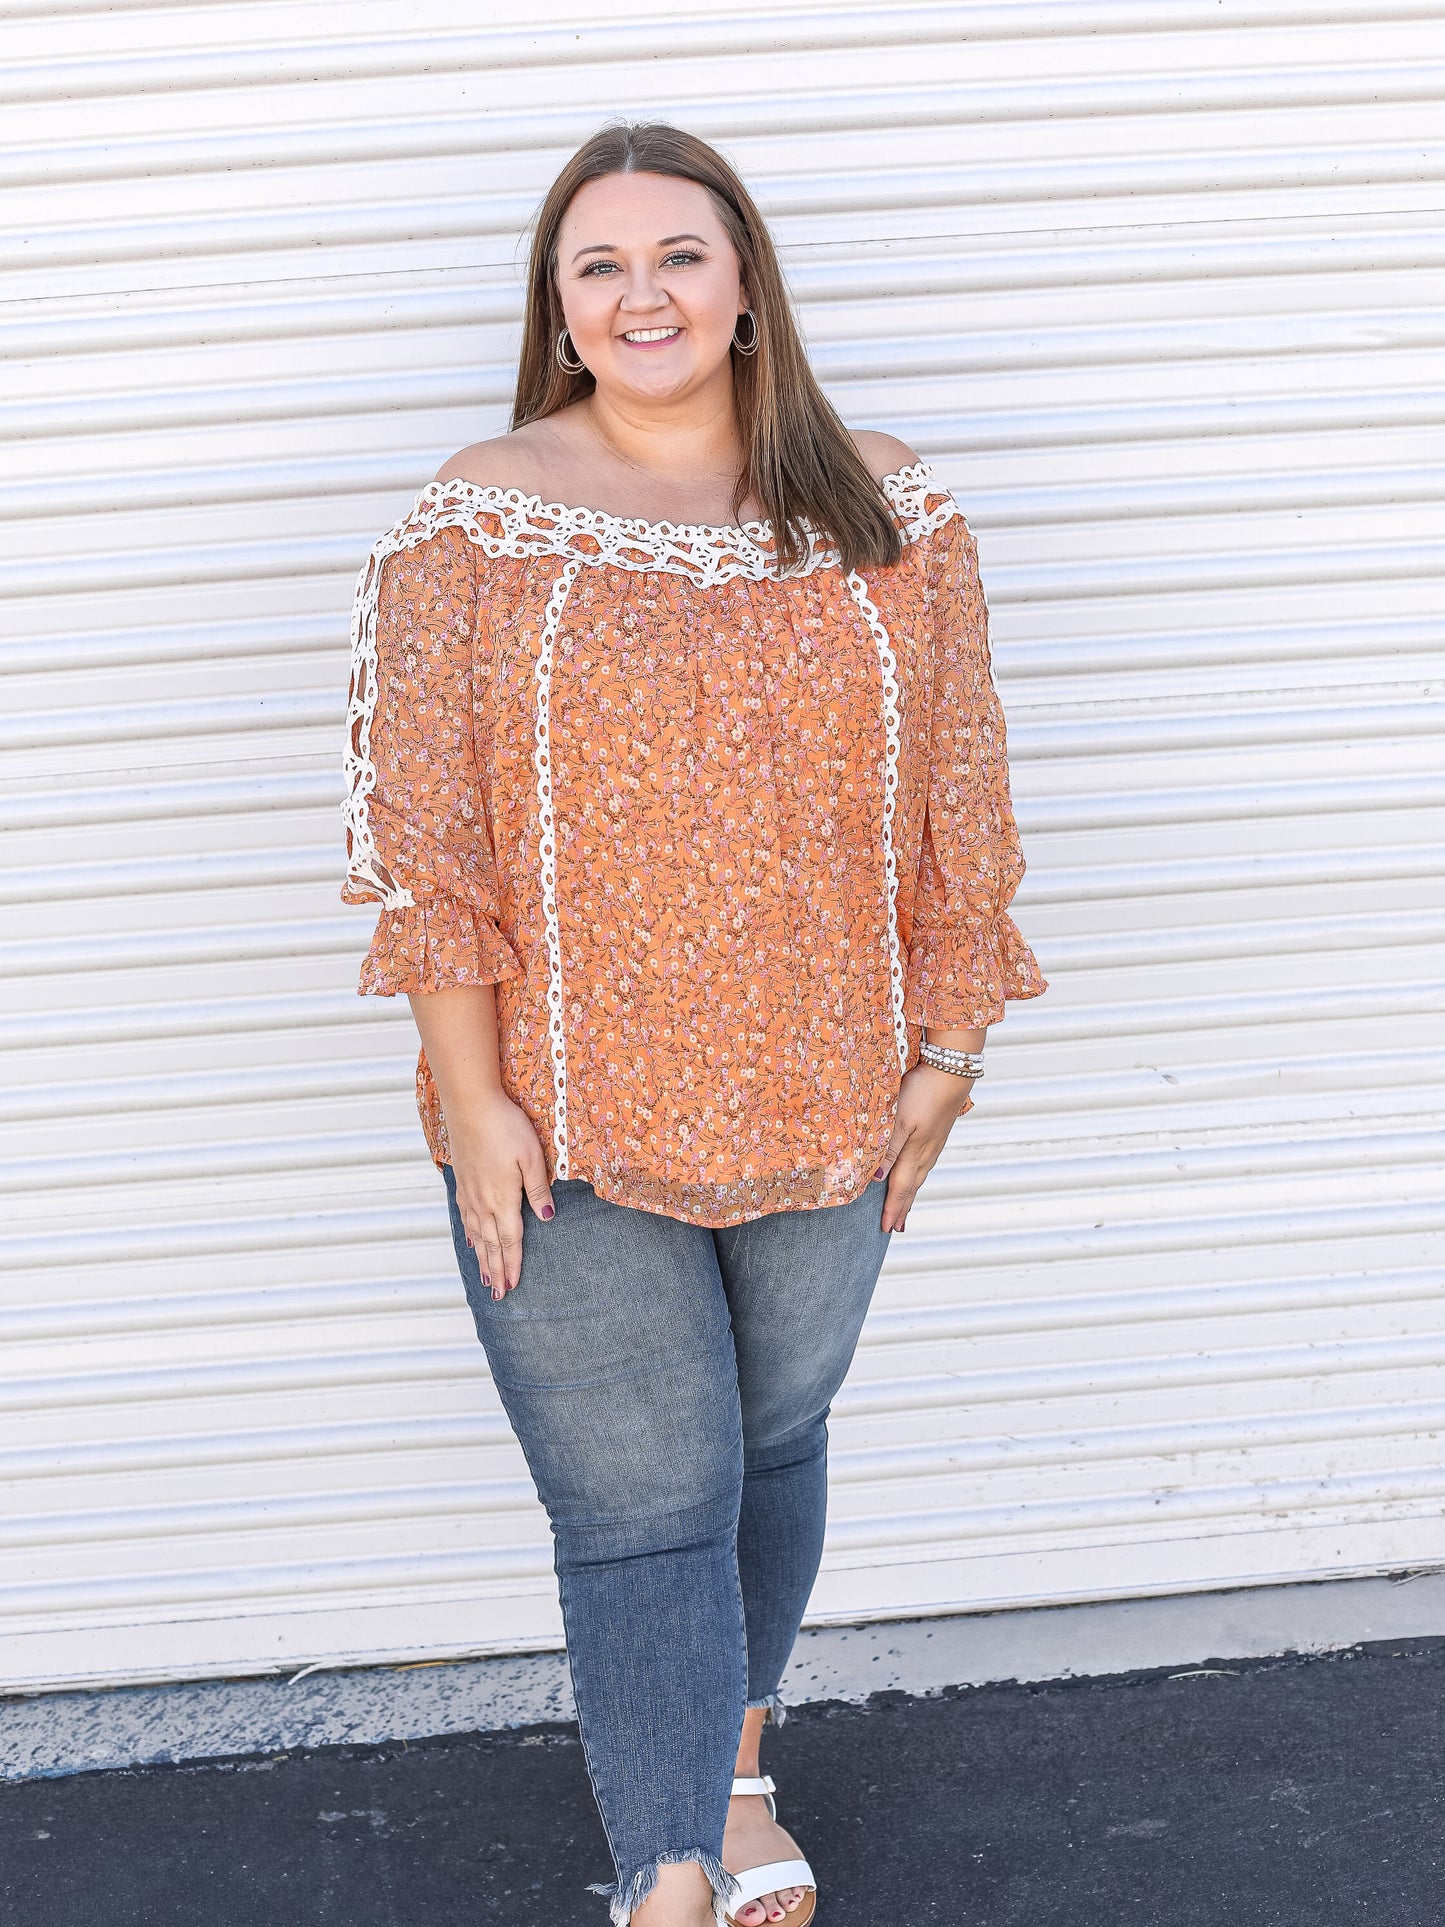 orange floral top paired with jeans and sandals. 